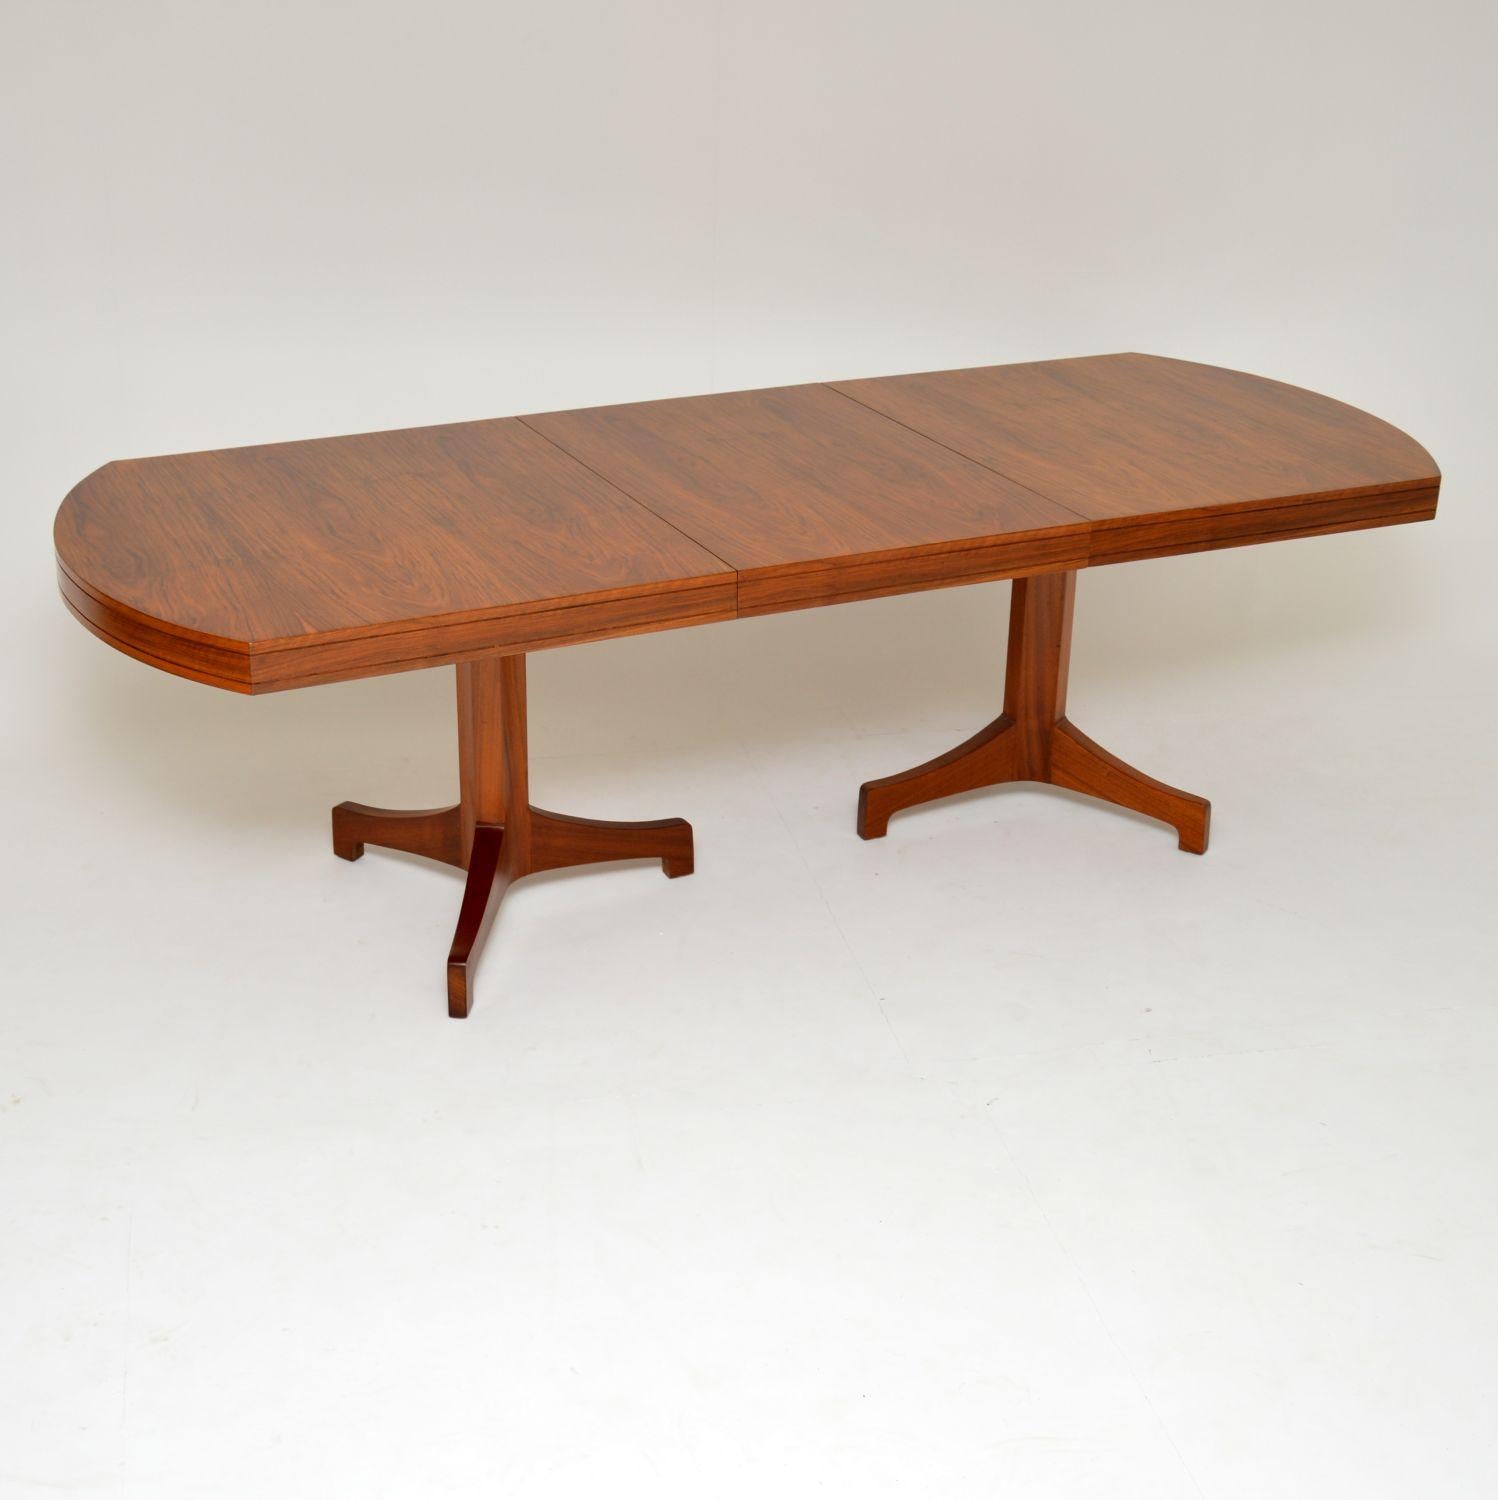 A magnificent and extremely rare vintage extending dining table in walnut, this dates from the 1960s. The previous owner who had it from new was adamant that this was a Robert Heritage design for Archie Shine. This may or may not be the case, the